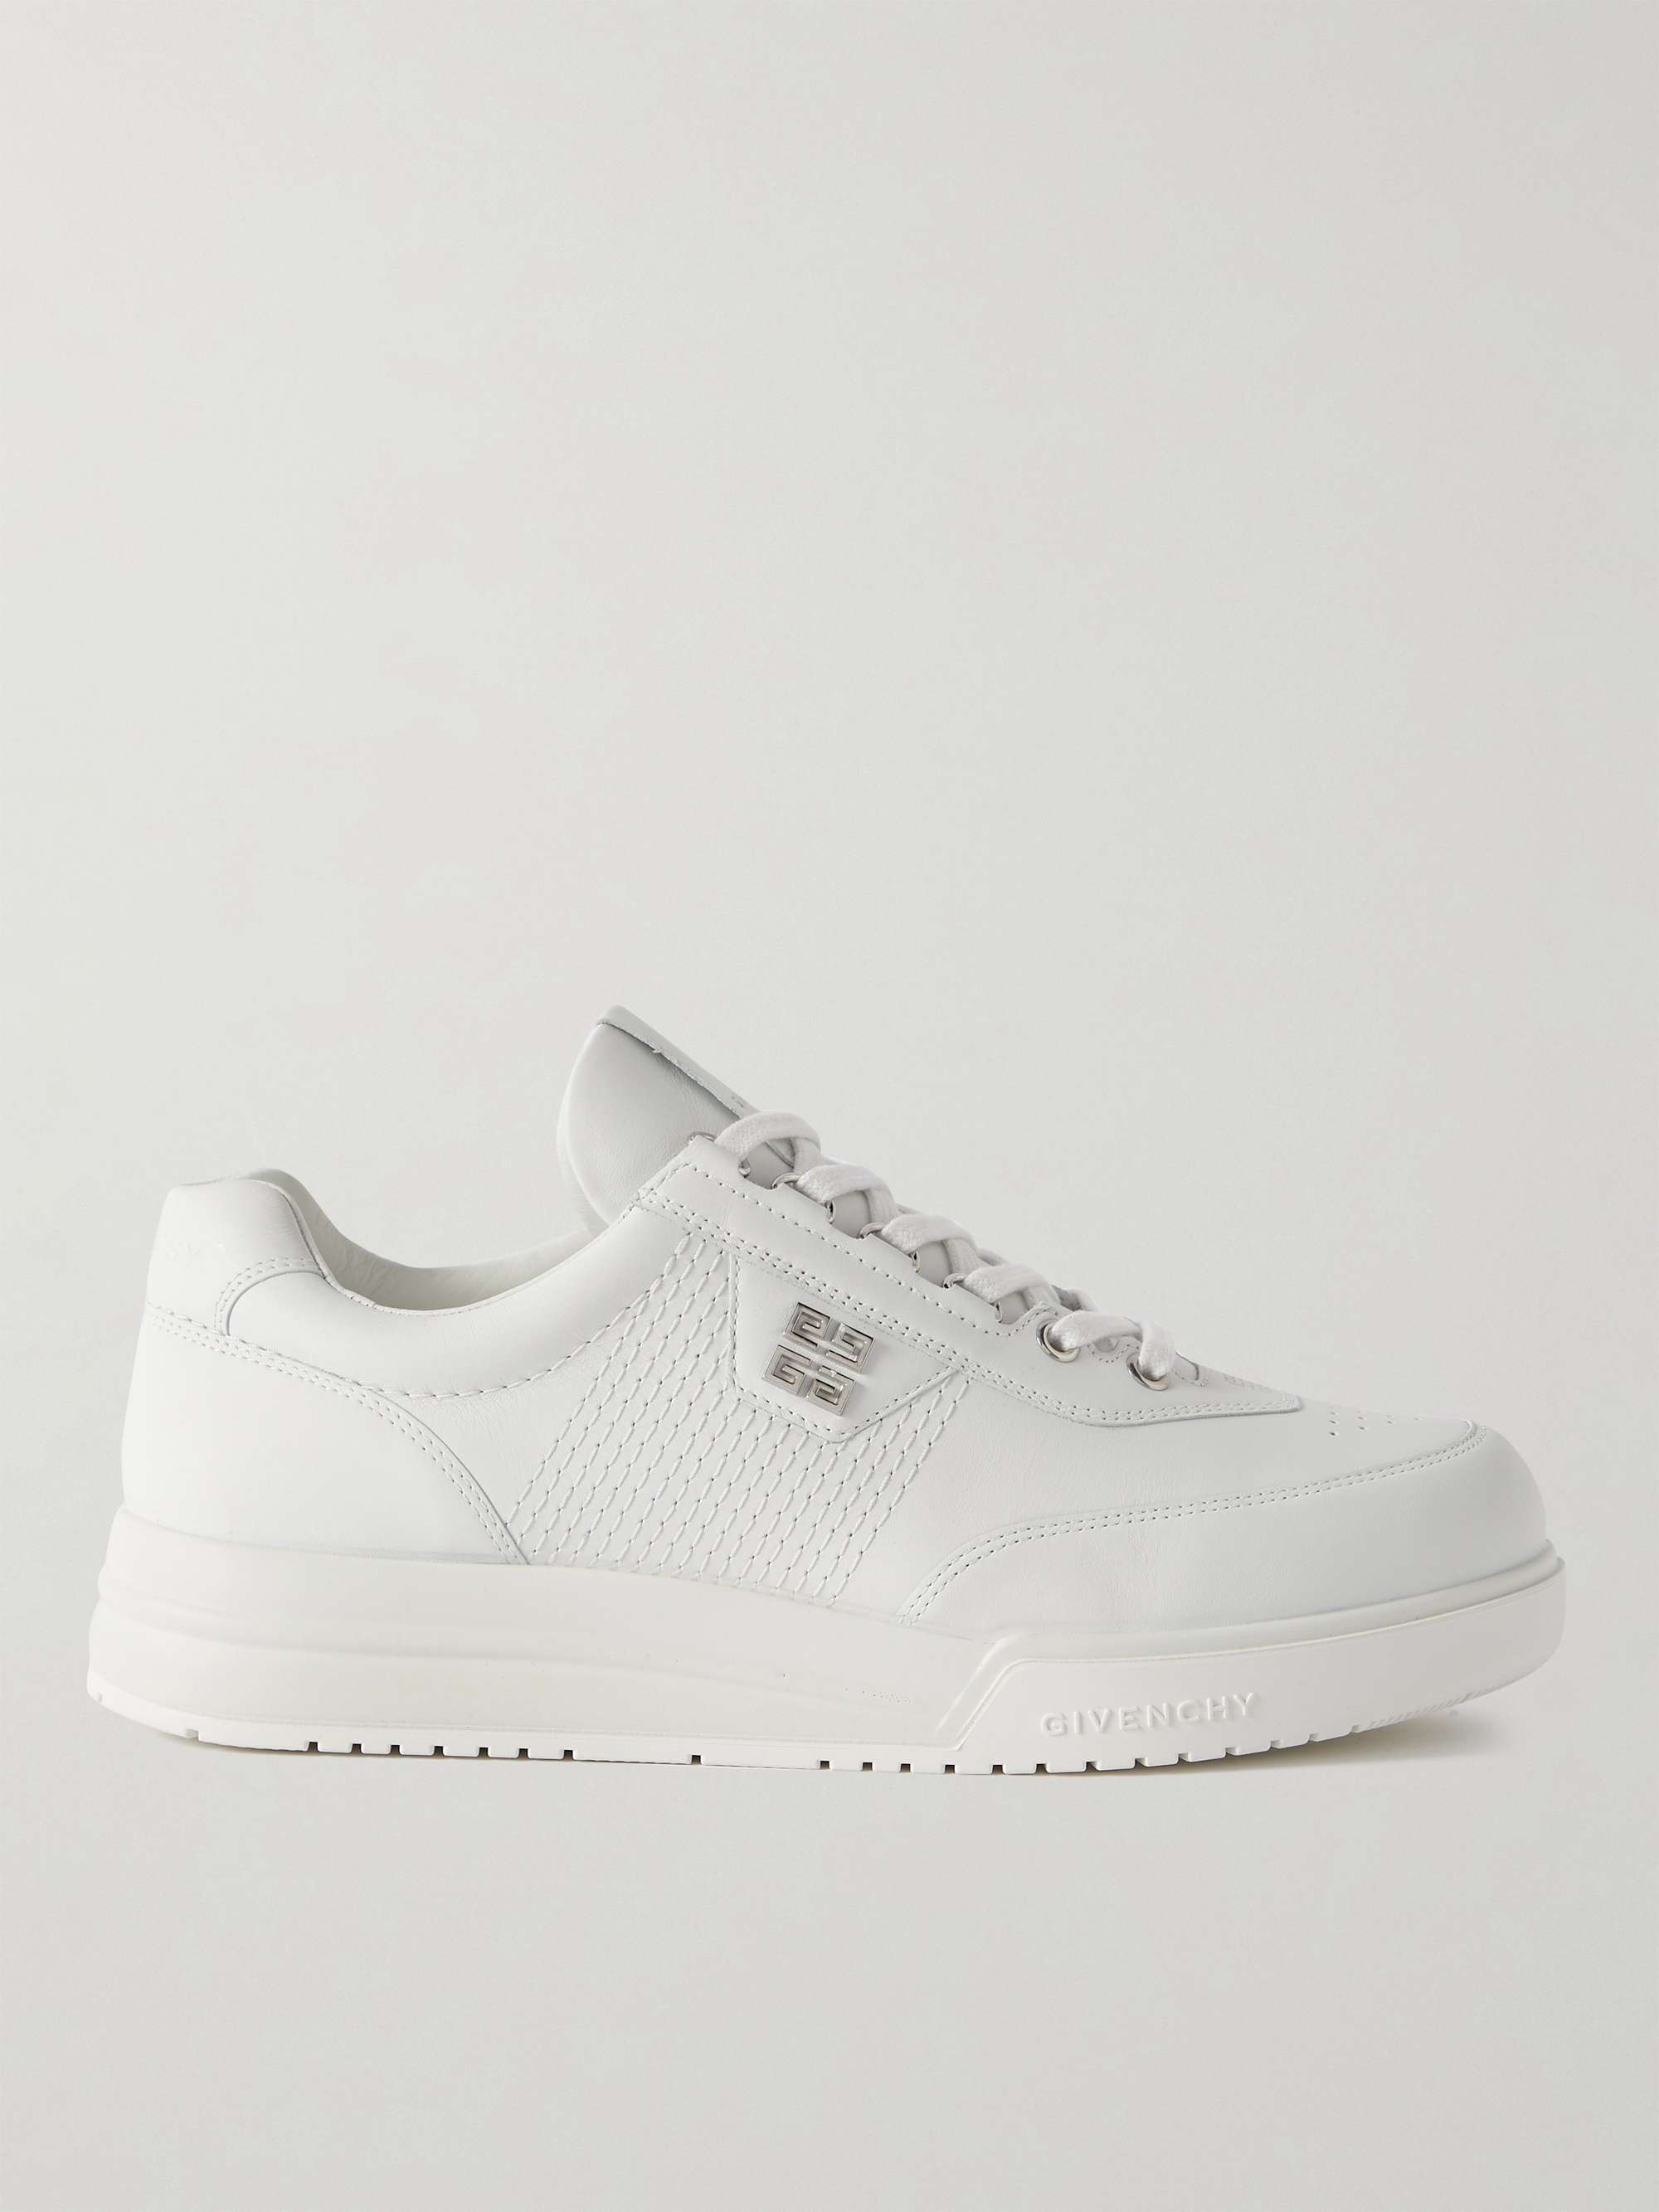 GIVENCHY G-4 Logo-Detailed Leather Sneakers | MR PORTER